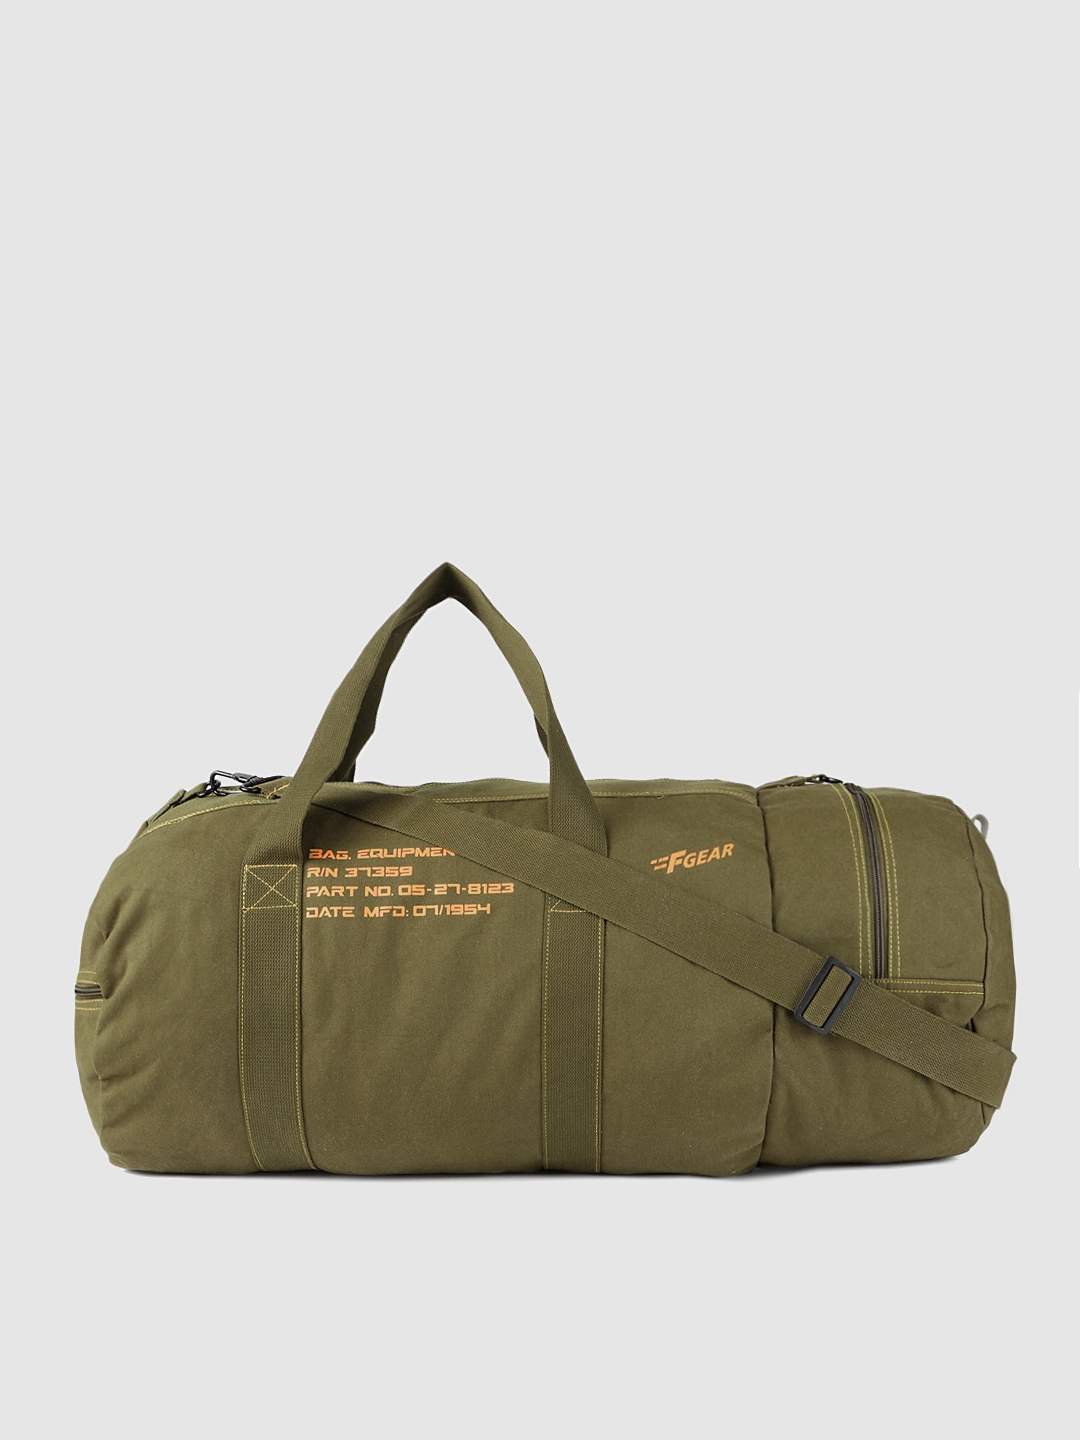 F Gear Unisex Olive Printed Soldier Canvas Travel Duffel Bag